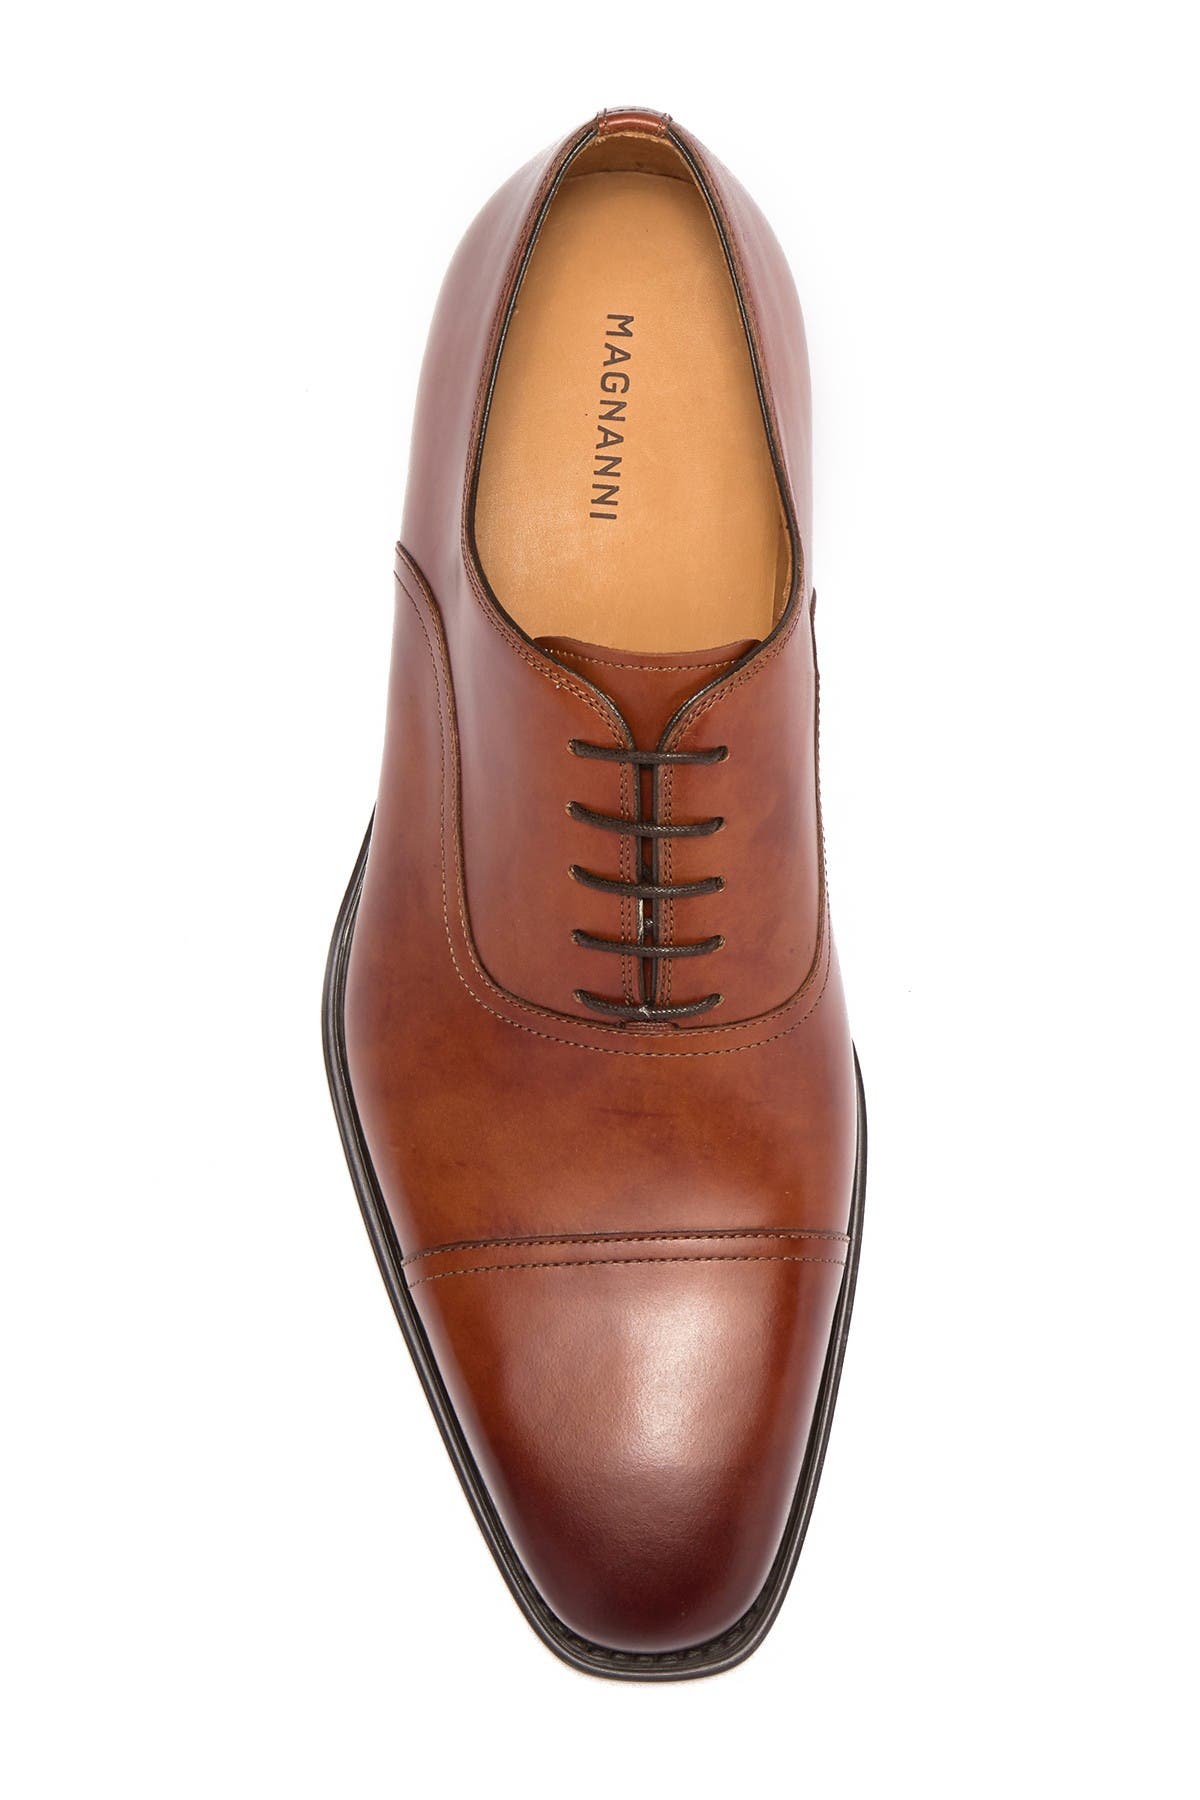 Magnanni | Lucas Leather Oxford 